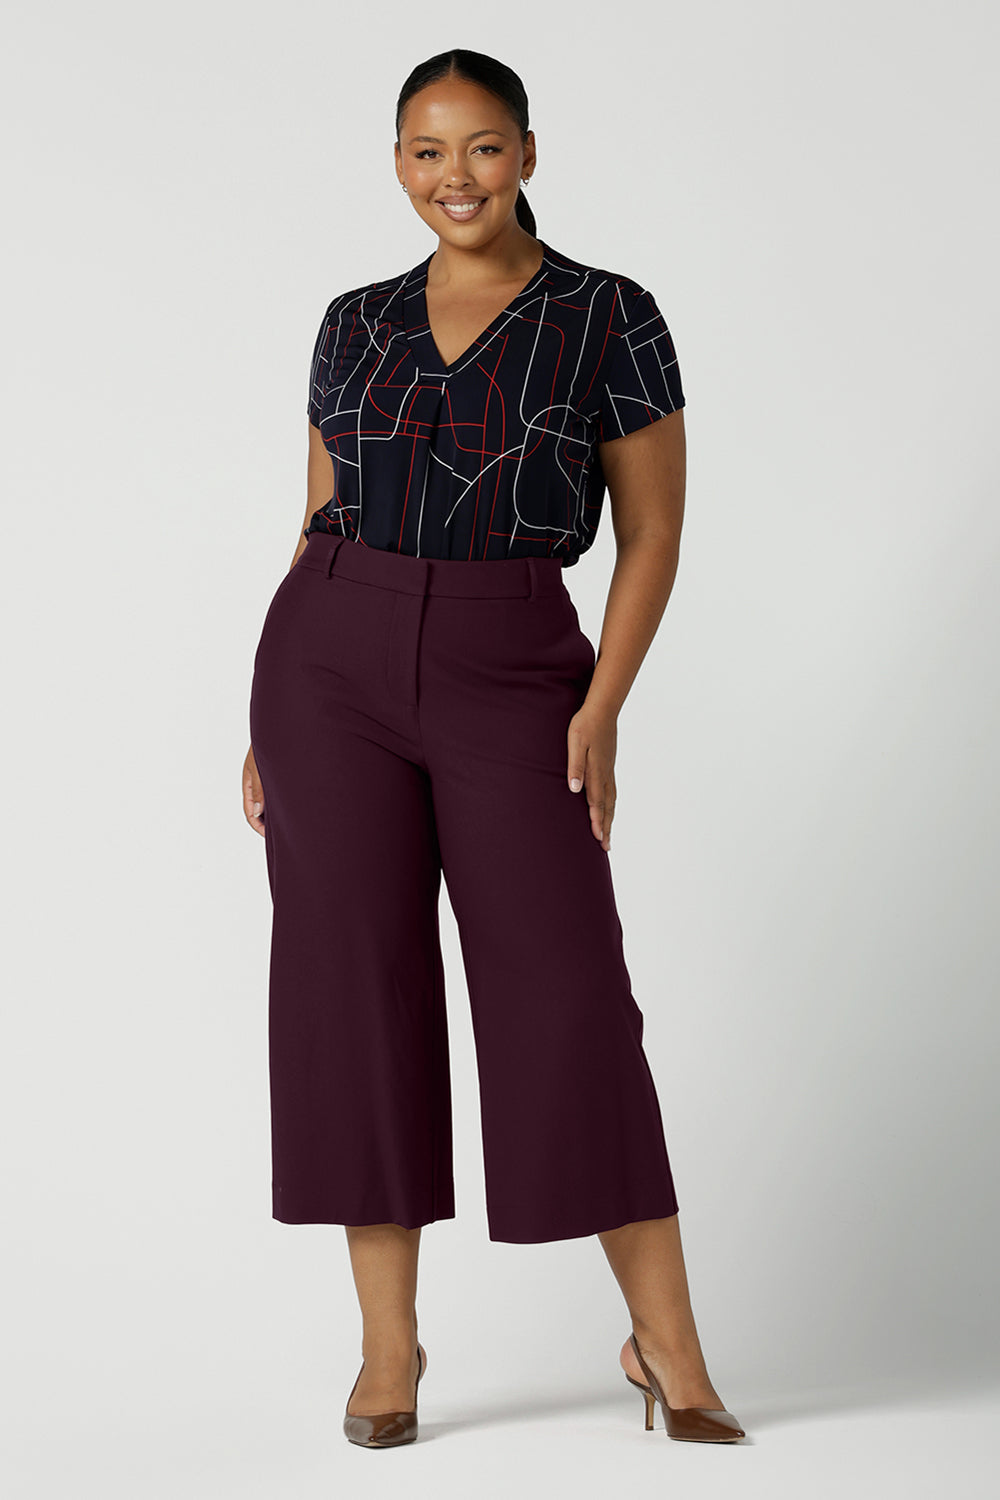 Size 12 women wears a Emily Top in Navy Abstract print. V-neckline with short sleeves on a navy base colour. Geometric print perfect for a corporate office look. Made in Australia for women size 8 - 24. Styled back with Mulberry Yael ponte pant. Soft tailored culottes. 